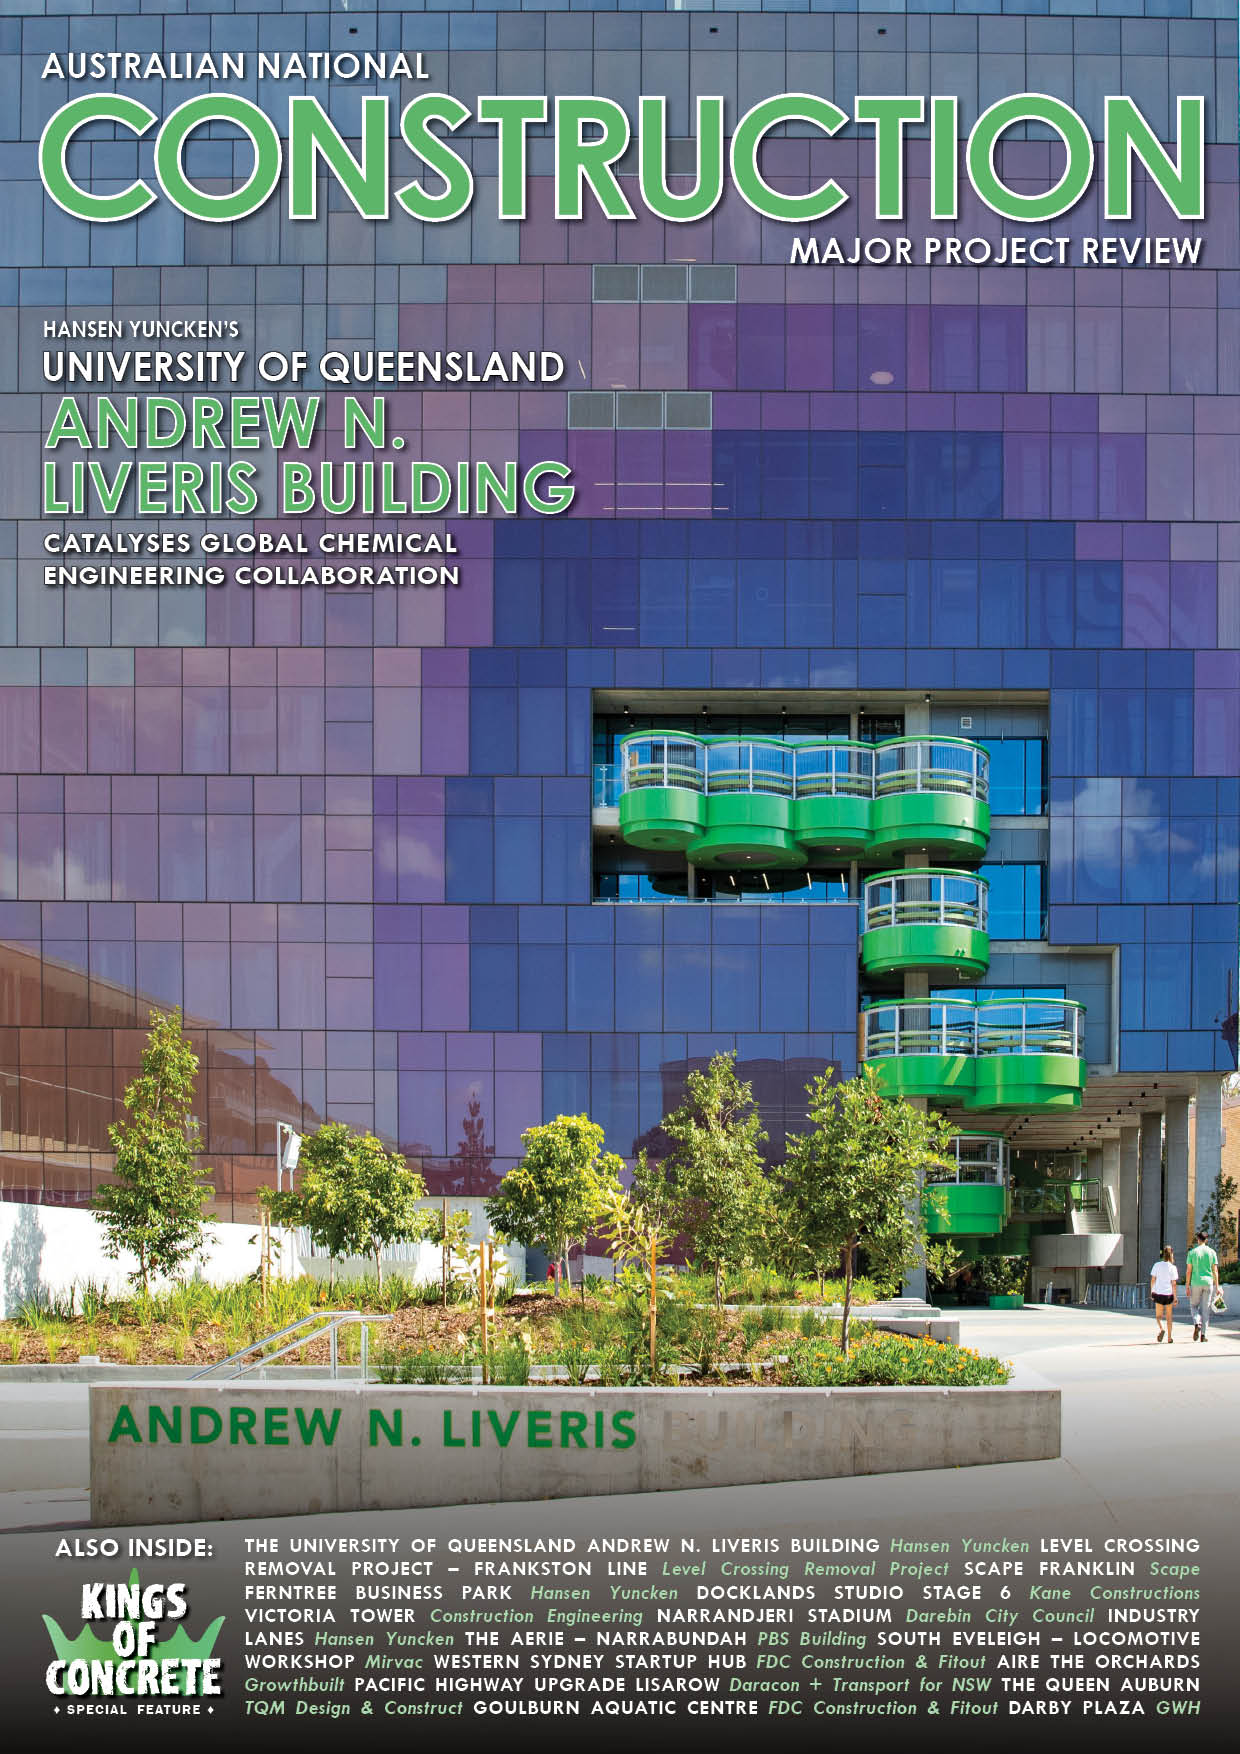 Australian National Construction Review July 2022 issue link, featuring the University of Queensland Andrew N. Liveris Building on the front cover.